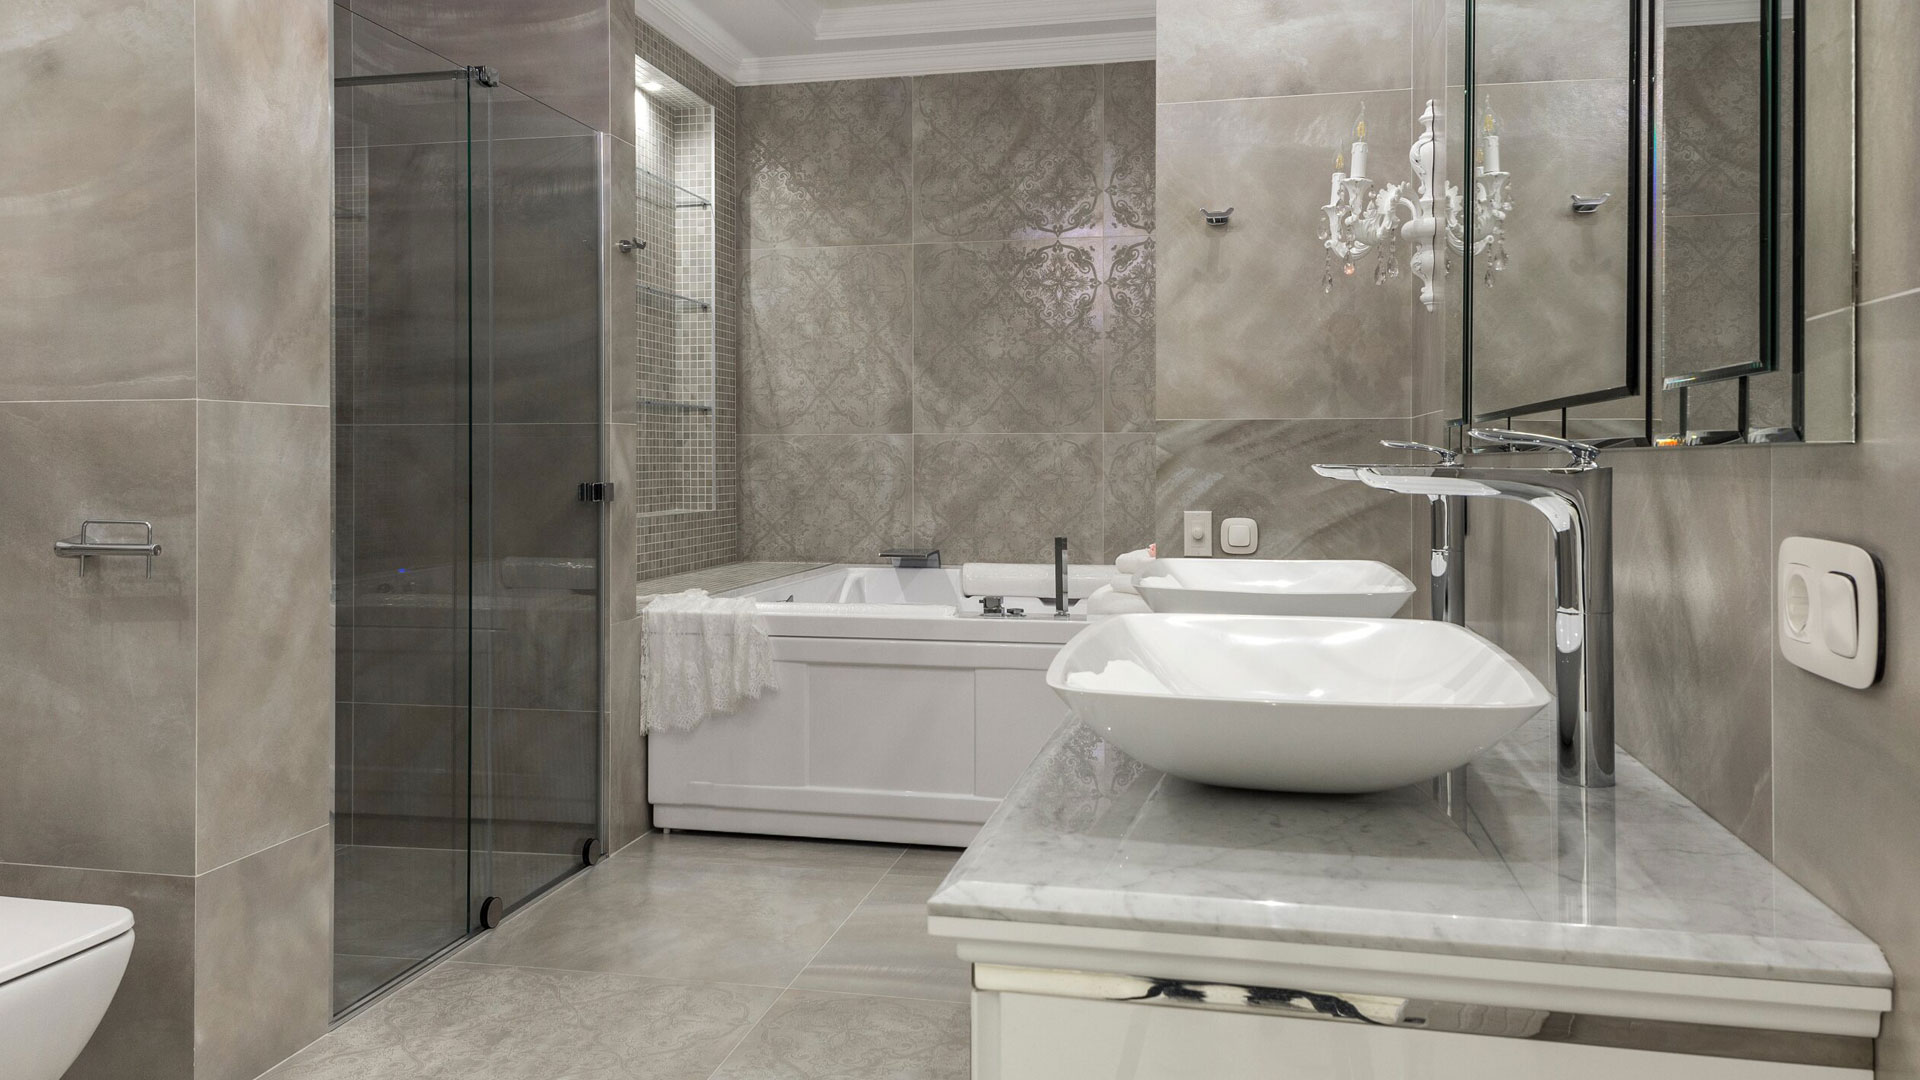 Great Tips to Make Your Bathroom Luxurious